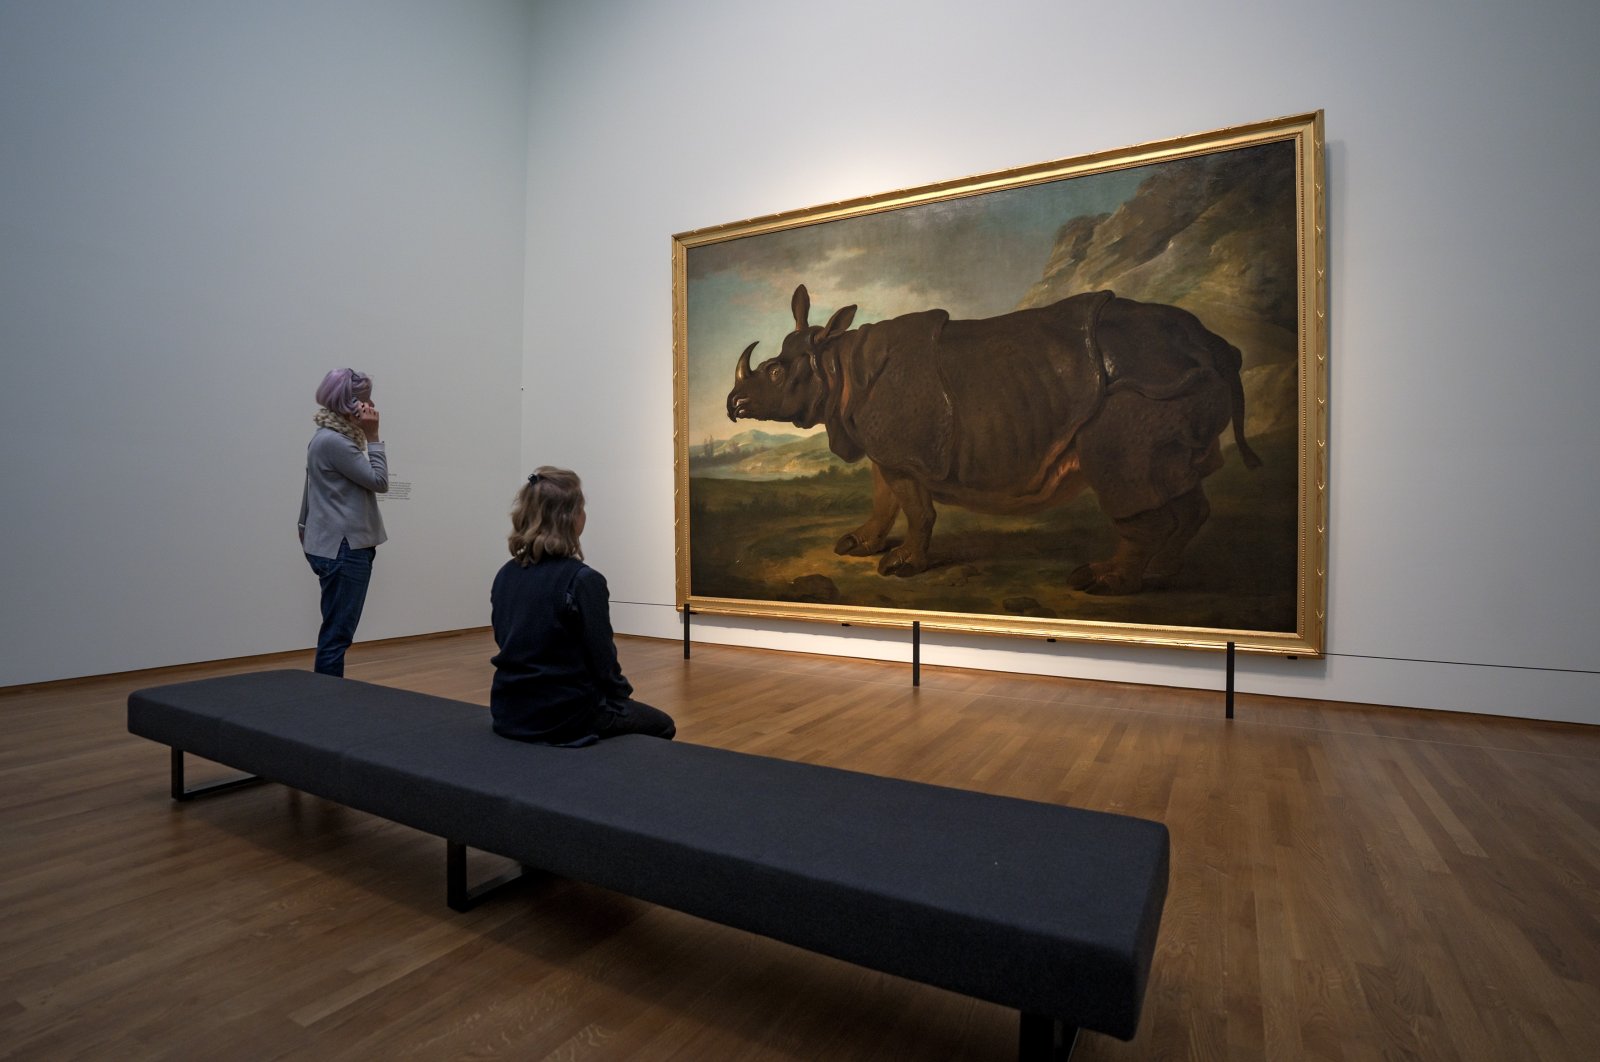 The showpiece of the exhibit &quot;Clara the Rhinoceros&quot; at Amsterdam&#039;s Rijksmuseum is a life-size painting of Clara by French artist Jean-Baptiste Oudry, Amsterdam, Netherlands, Sept. 27, 2022. (dpa Photo)